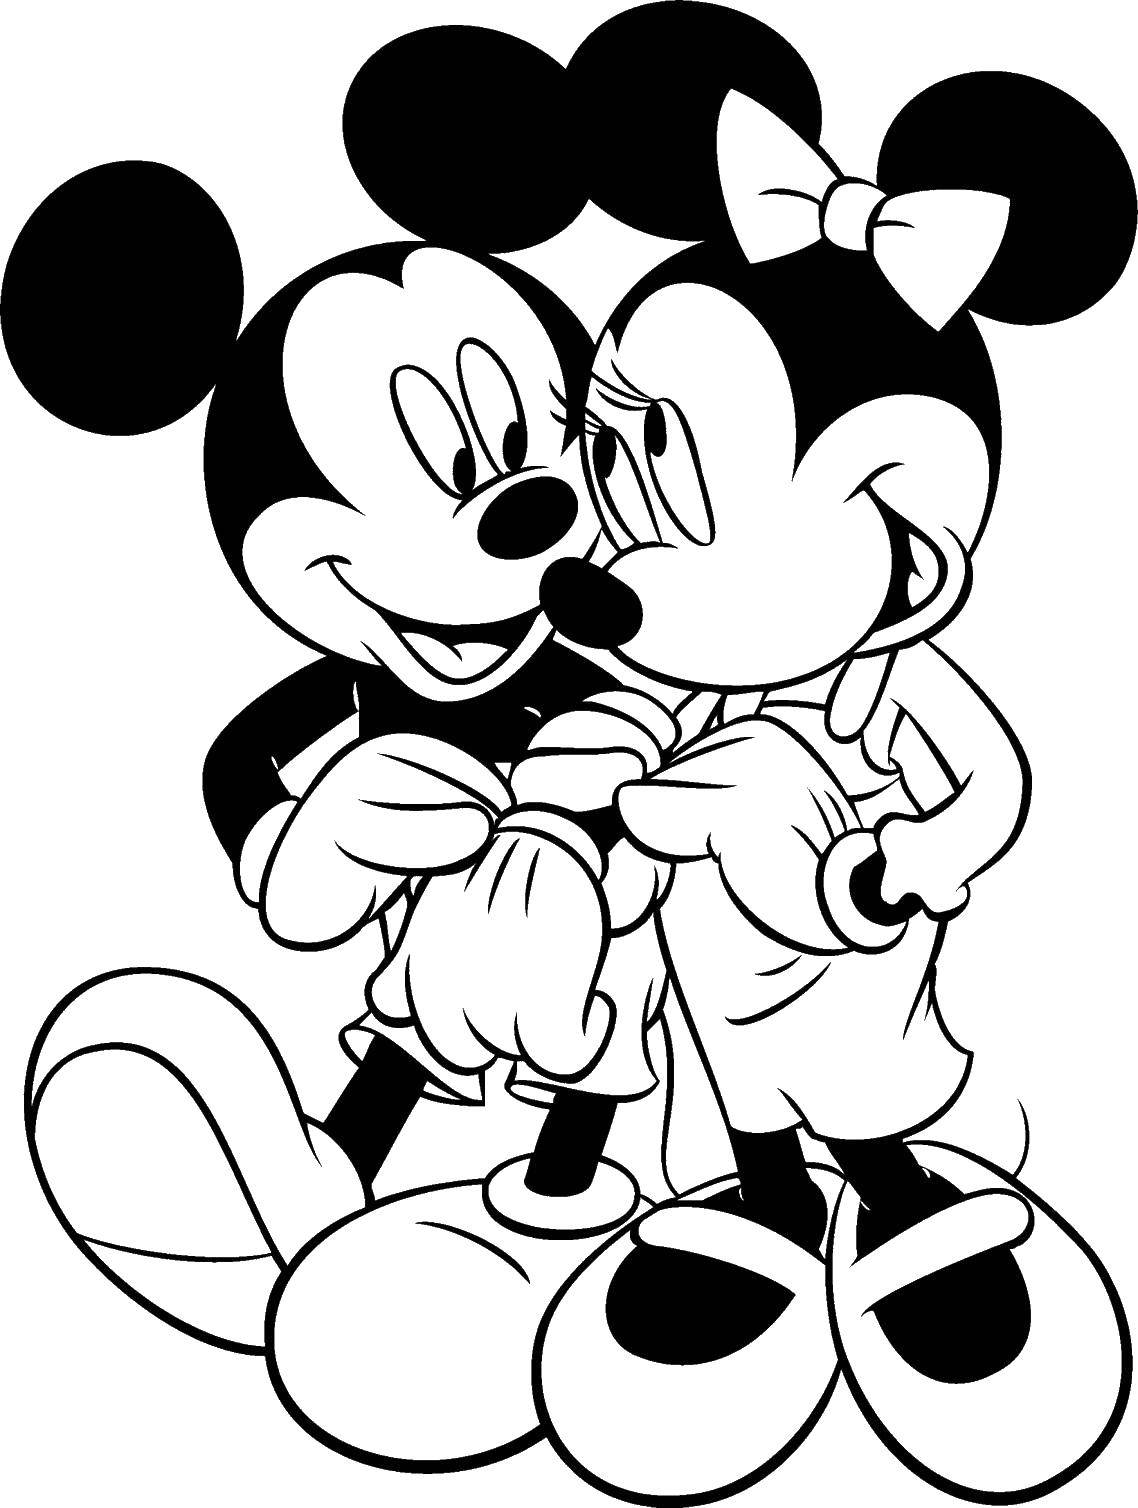 Coloring Mickey and mini mouse. Category Mickey mouse. Tags:  Mickey mouse, Mrs. mouse, cartoons.